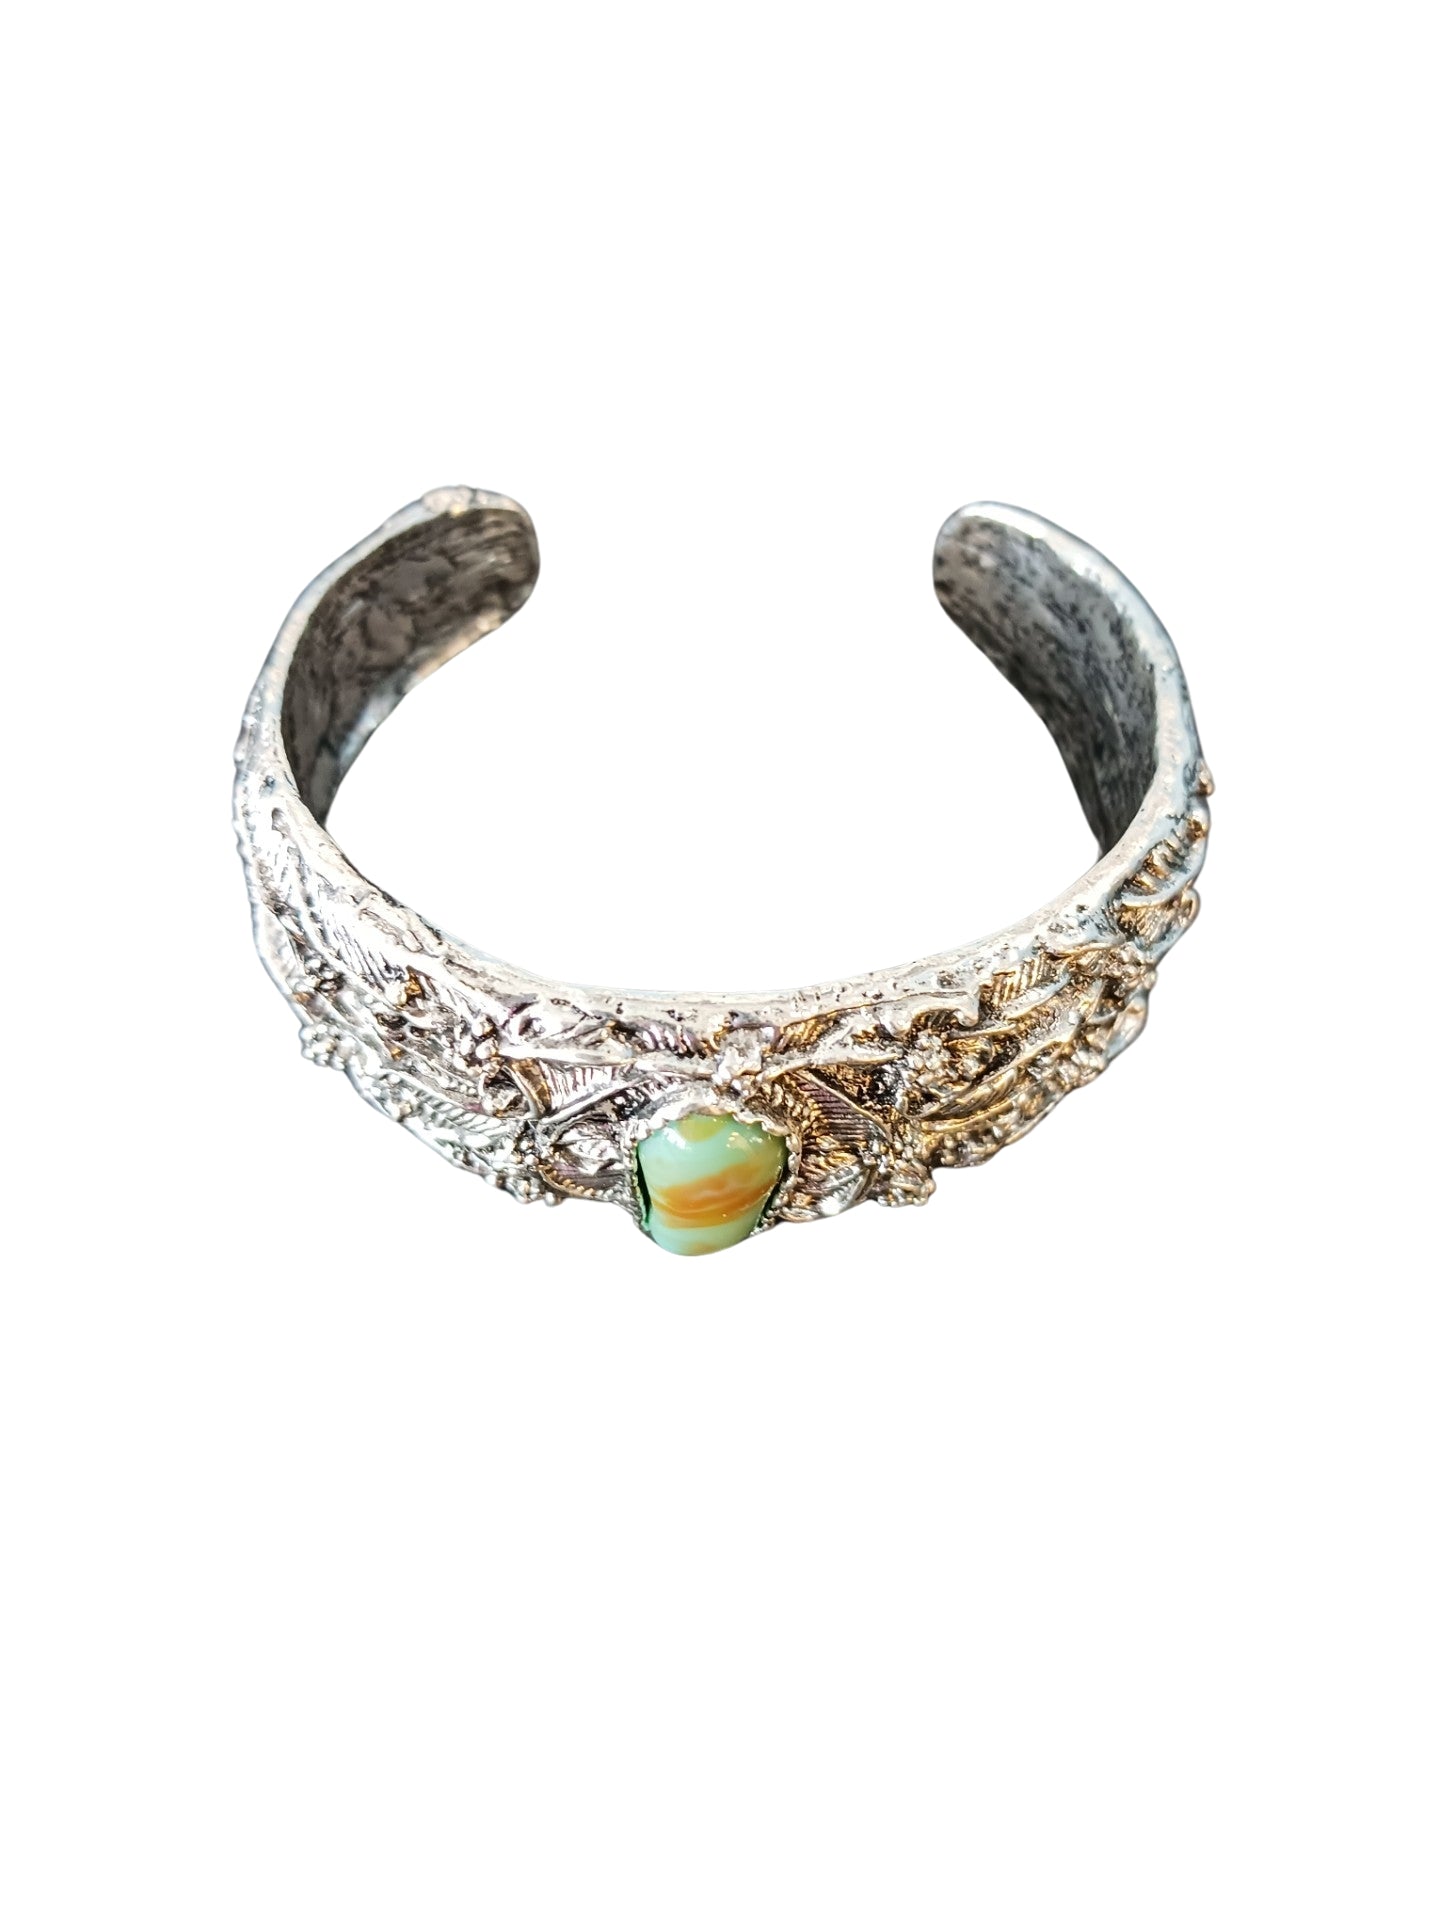 Silver Tone and Turquoise Cuff Bracelet